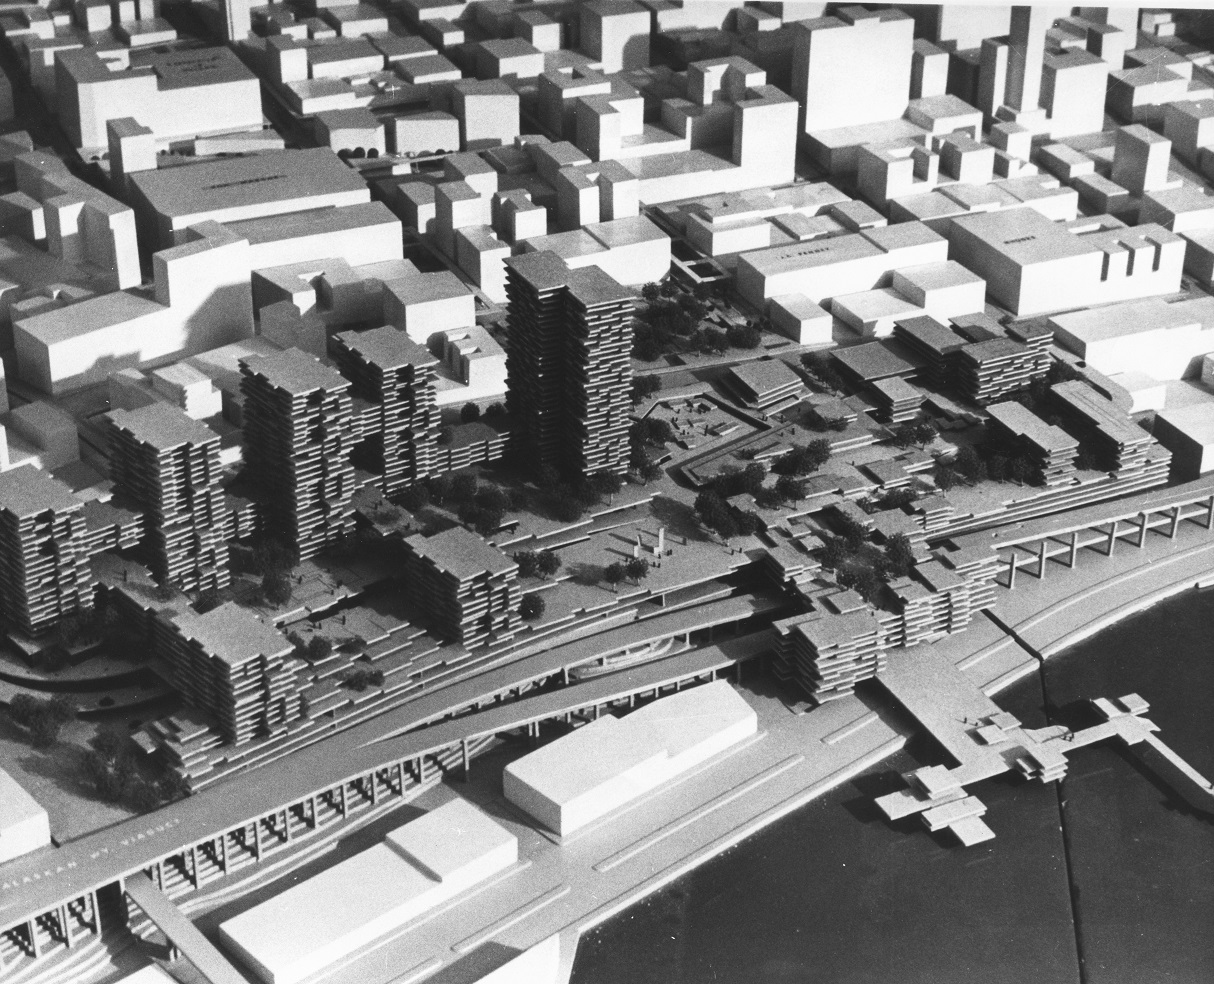 Architectural model of Pike Plaza Redevelopment Project, 1968